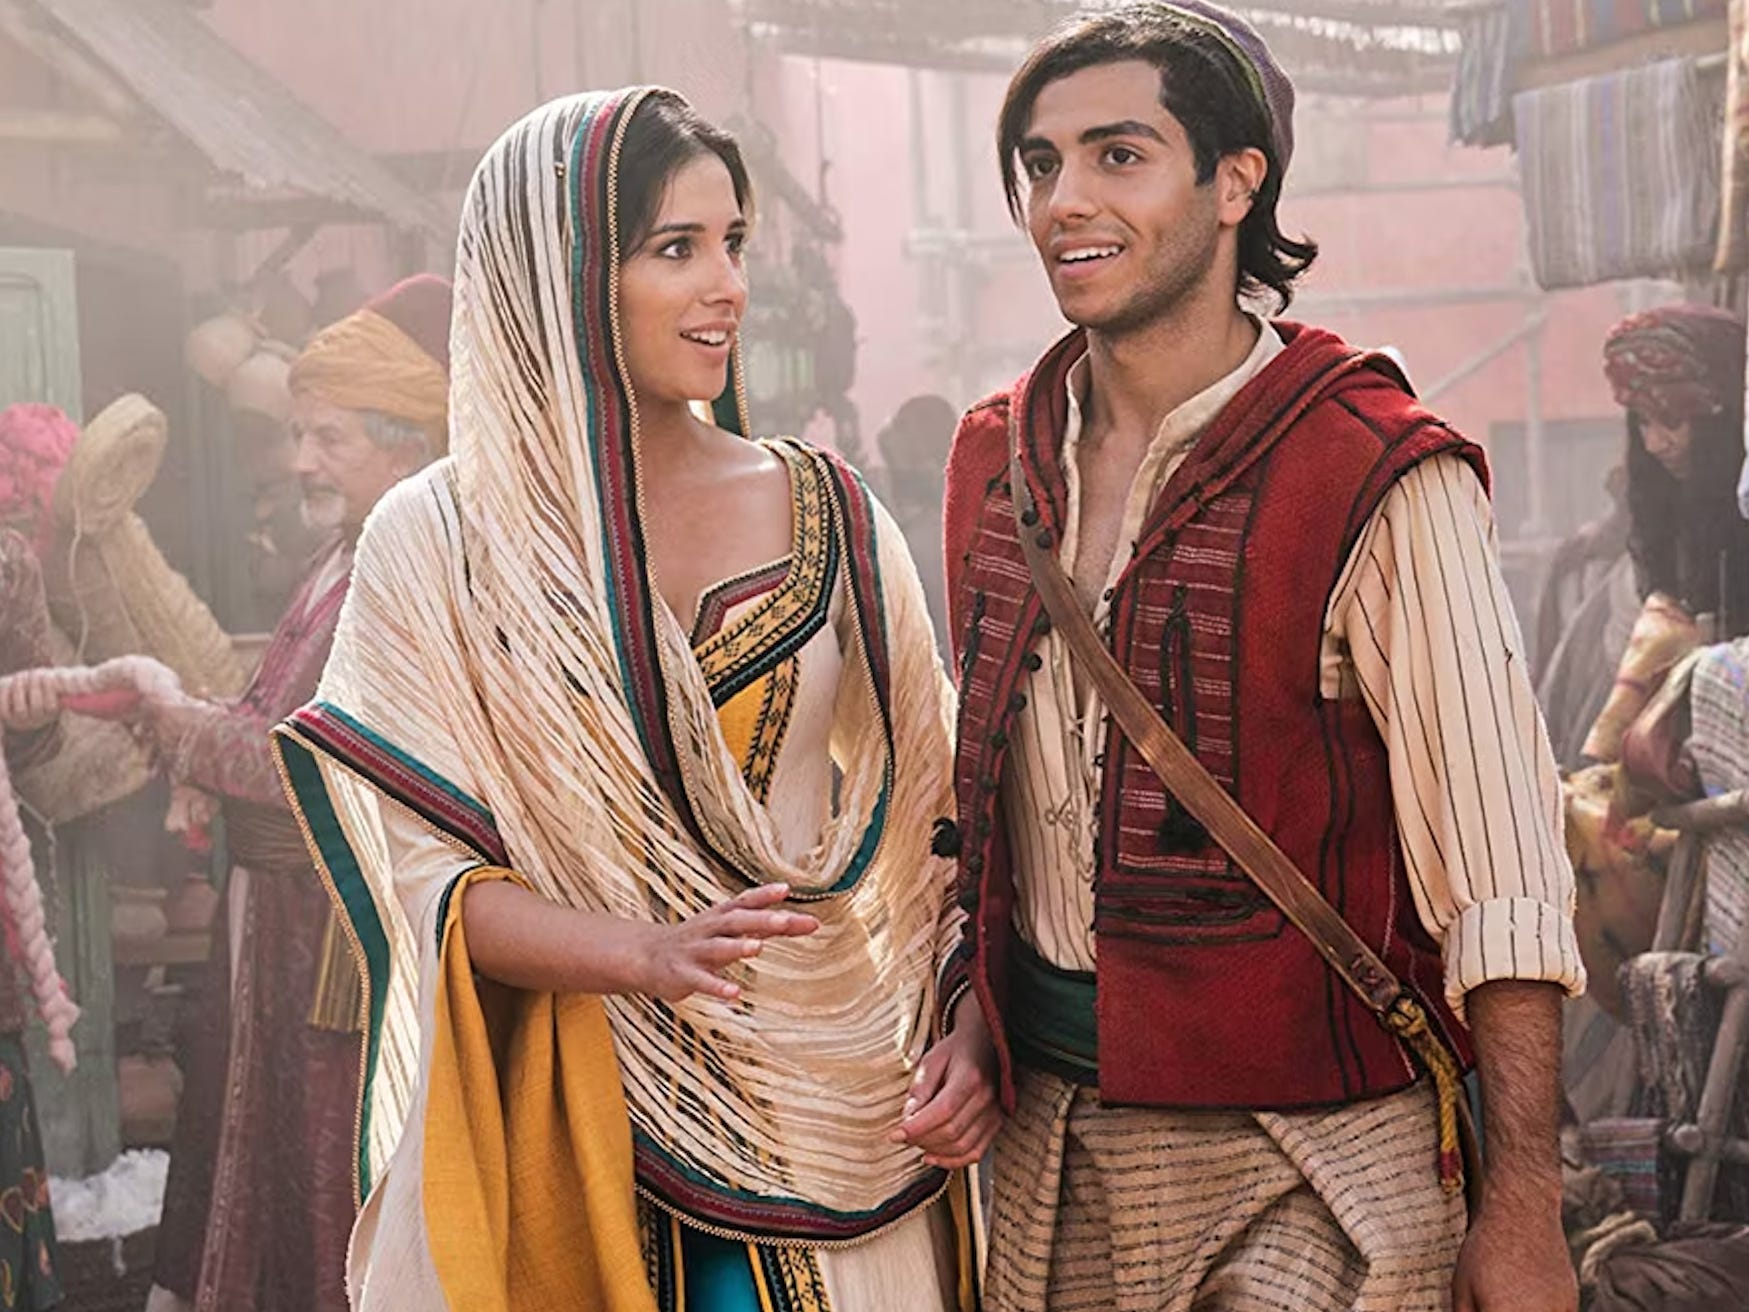 <p>"Aladdin," released in 2019, also made $1 billion around the world. In this case, we have no qualms with <a href="https://www.businessinsider.com/aladdin-live-action-review-2019-5">Mena Massoud or Naomi Scott</a>, who play Aladdin and Jasmine wonderfully.</p><p>Who we can't whole-heartedly support is Will Smith, who plays the Genie. Simply put, no one is competing with Robin Williams' iconic performance in the 1992 original. It's a tour-de-force, one of the best voiceover performances <em>ever.</em></p><p>Smith was never going to be able to compete, and the off-putting <a href="https://www.businessinsider.com/will-smith-genie-live-action-aladdin-meme-twitter-reactions-2019-2">design of his character</a> and his rap-singing did him no favors.</p><p>Also, this movie was, for some reason, directed by Guy Ritchie. Ritchie is known for his action films, and he tried to inject as much action as he could into "Aladdin." But we'd argue this movie doesn't need it! It's a fairy tale about a street urchin falling in love with a princess!</p>